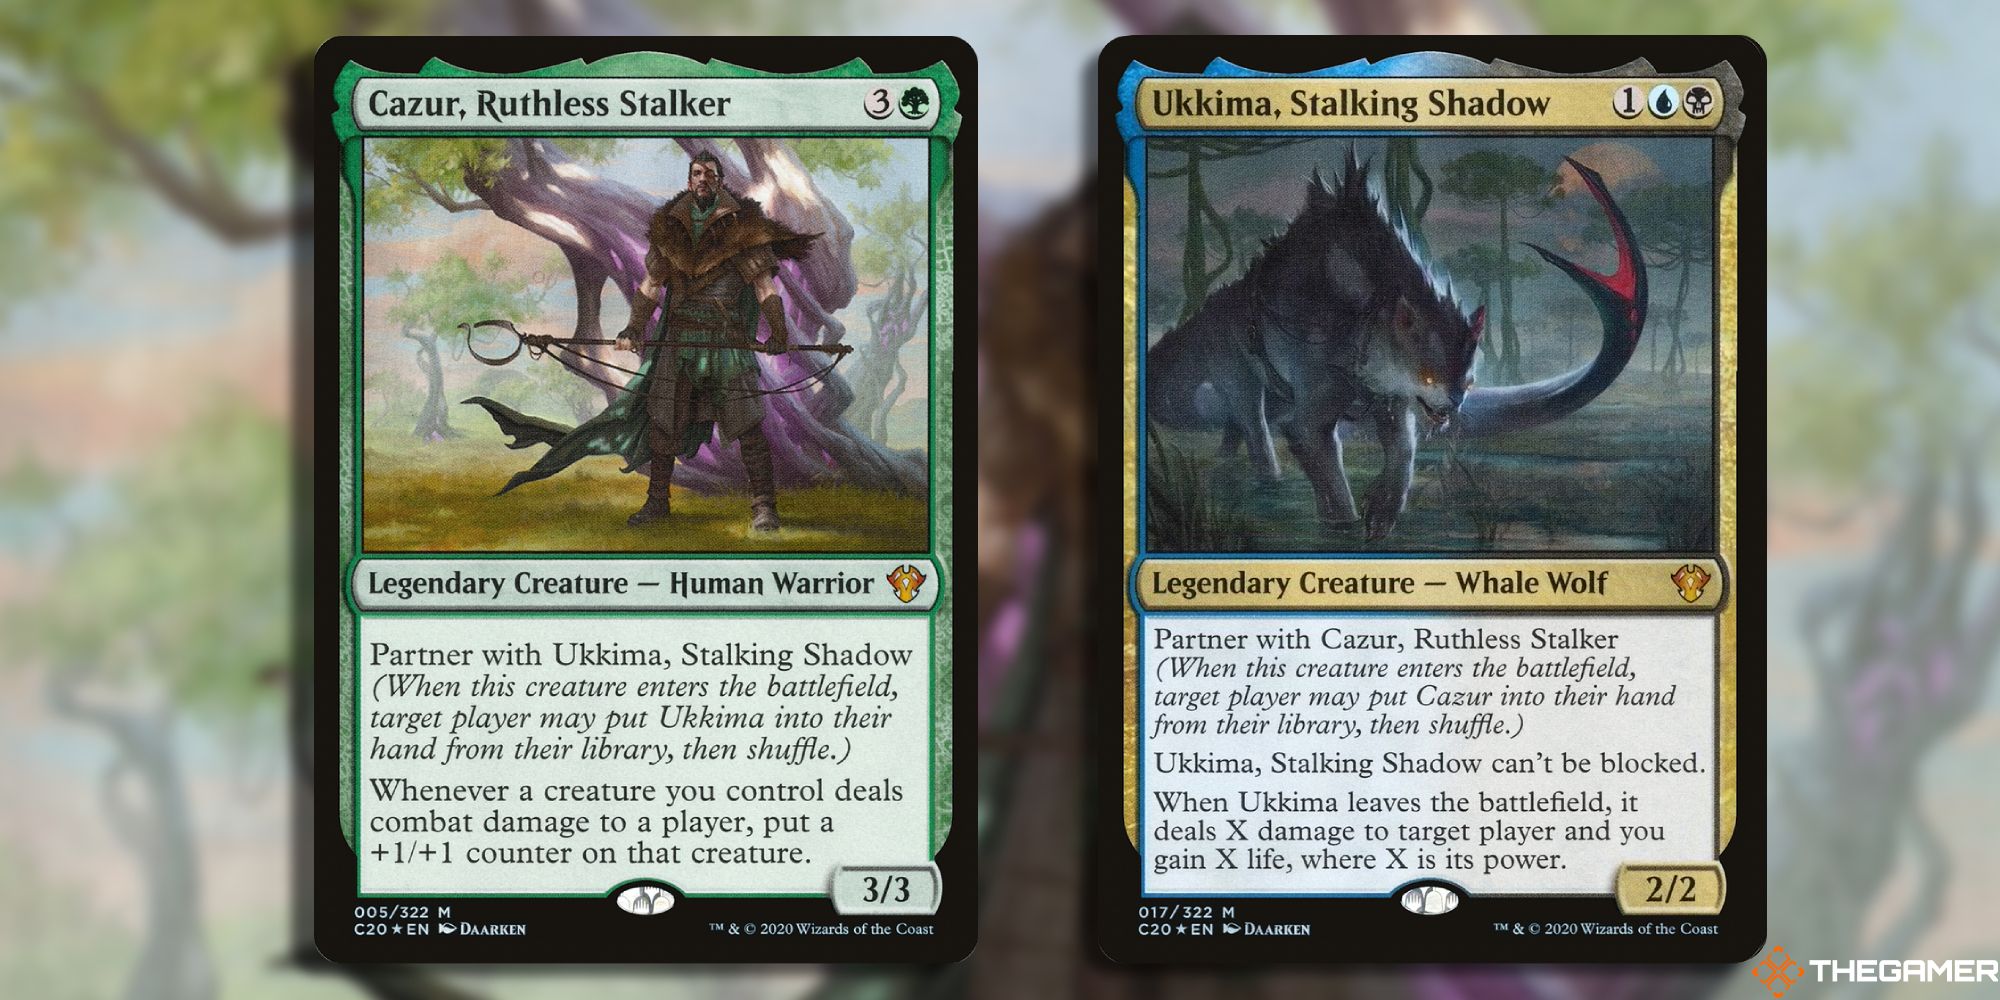 Image of the Cazur, Ruthless Stalker and Ukkima, Stalking Shadow card in Magic: The Gathering, with art by Daarken